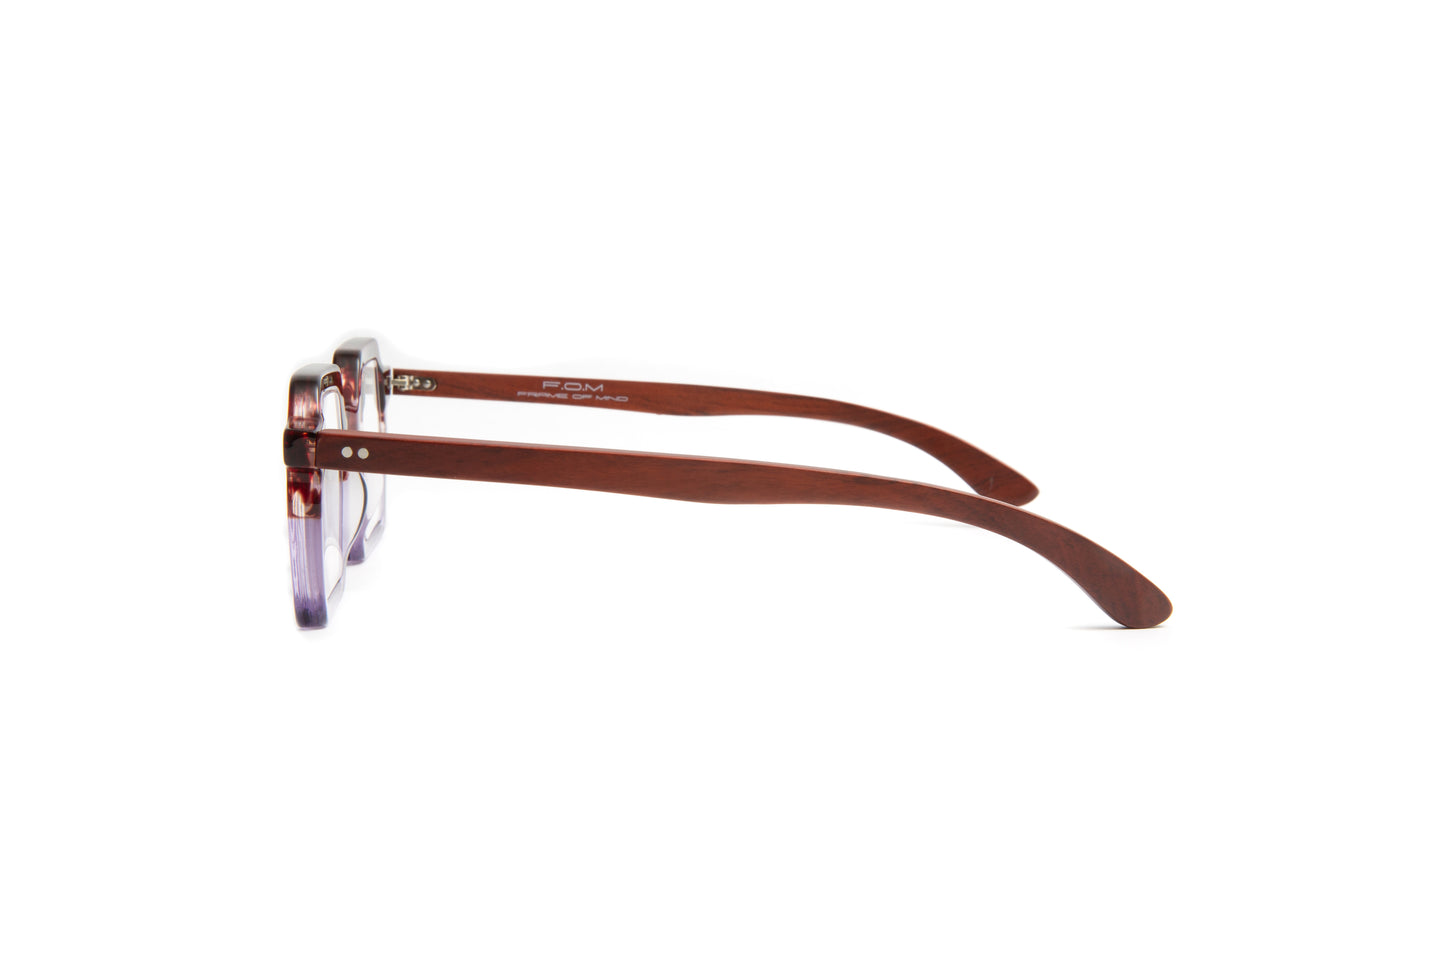 Tokyo square designer reading glasses with havana and transparent lilac acetate and cherry wood temples by Eyejets